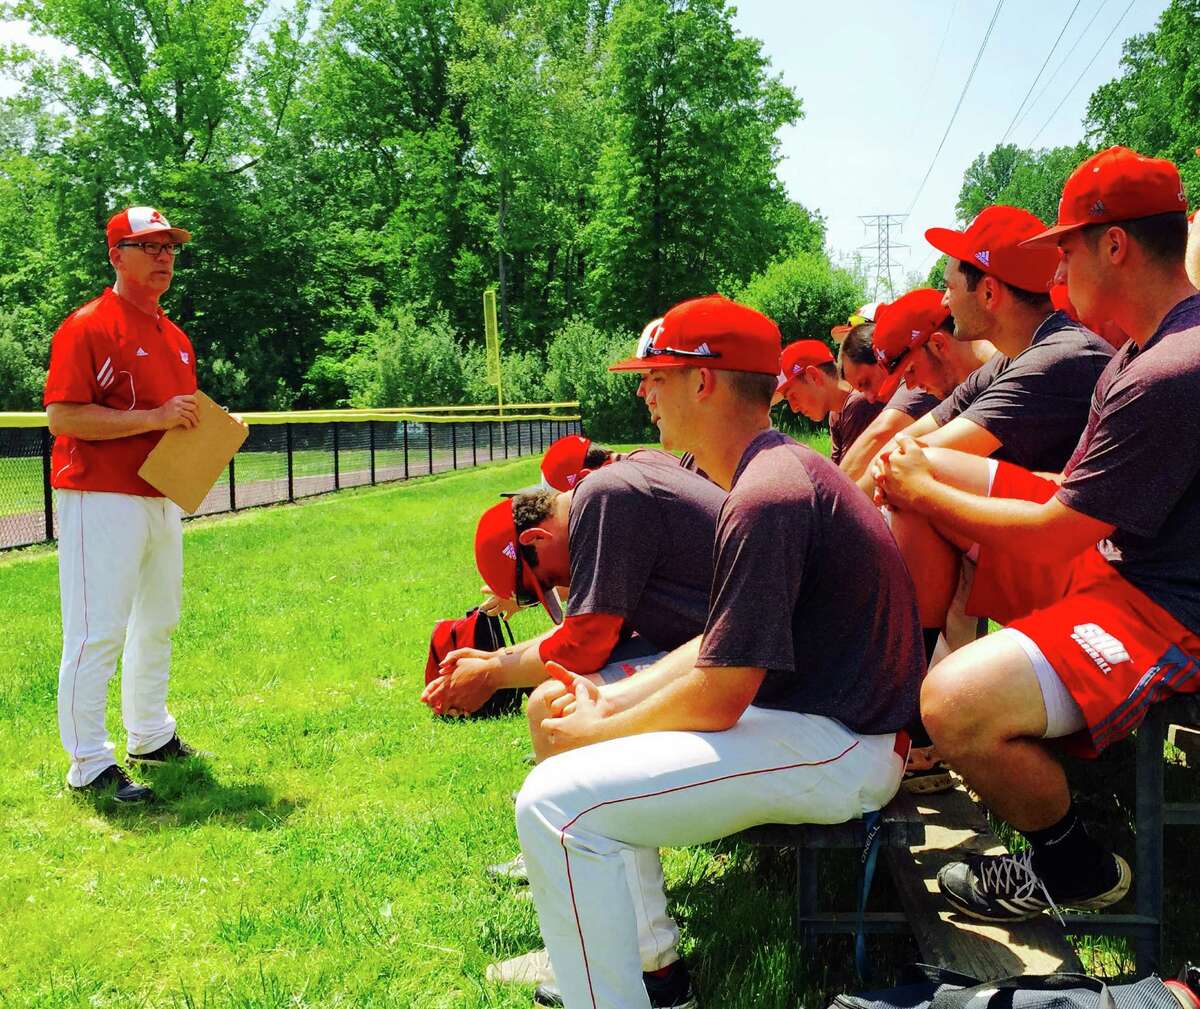 Sacred Heart University baseball coach Nick Giaquinto talks to his team about traveling to Texas for the NCAA tournament. The Pioneers will face Texas Christian University on Friday in Fort Worth. Stony Brook and North Carolina State are also in the TCU regional. SHU is making its third appearance in the NCAA tournament in the last five years.